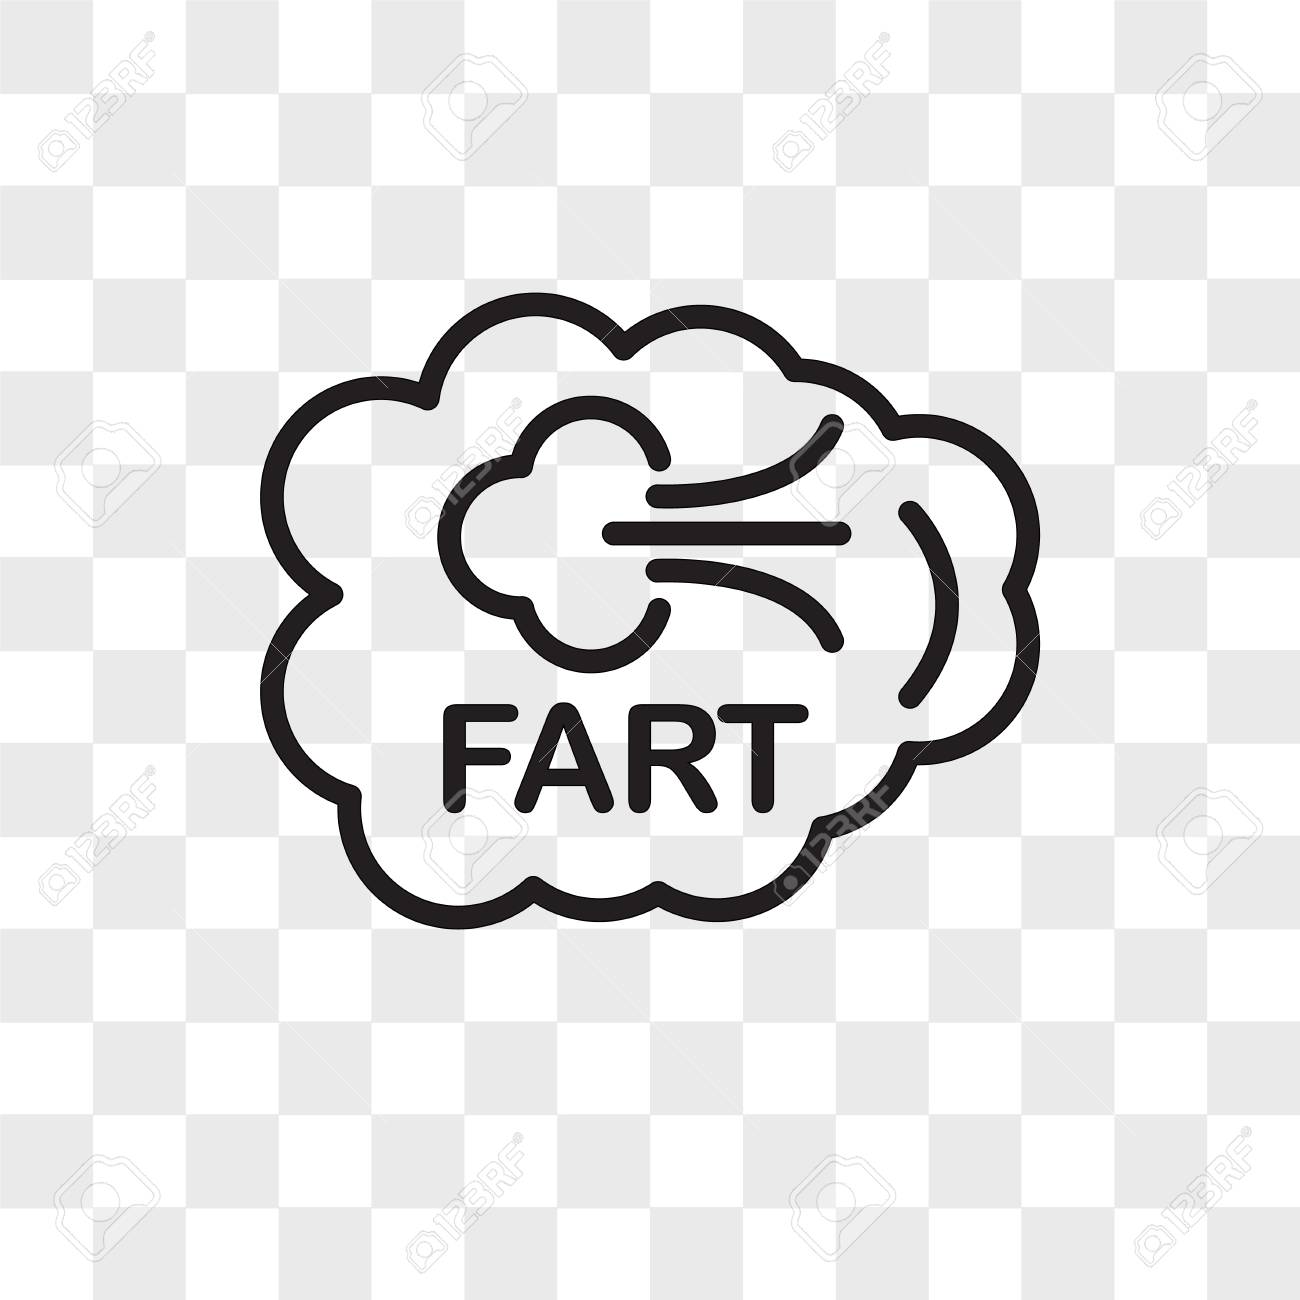 Fart Vector Icon Isolated On Transparent Background Logo